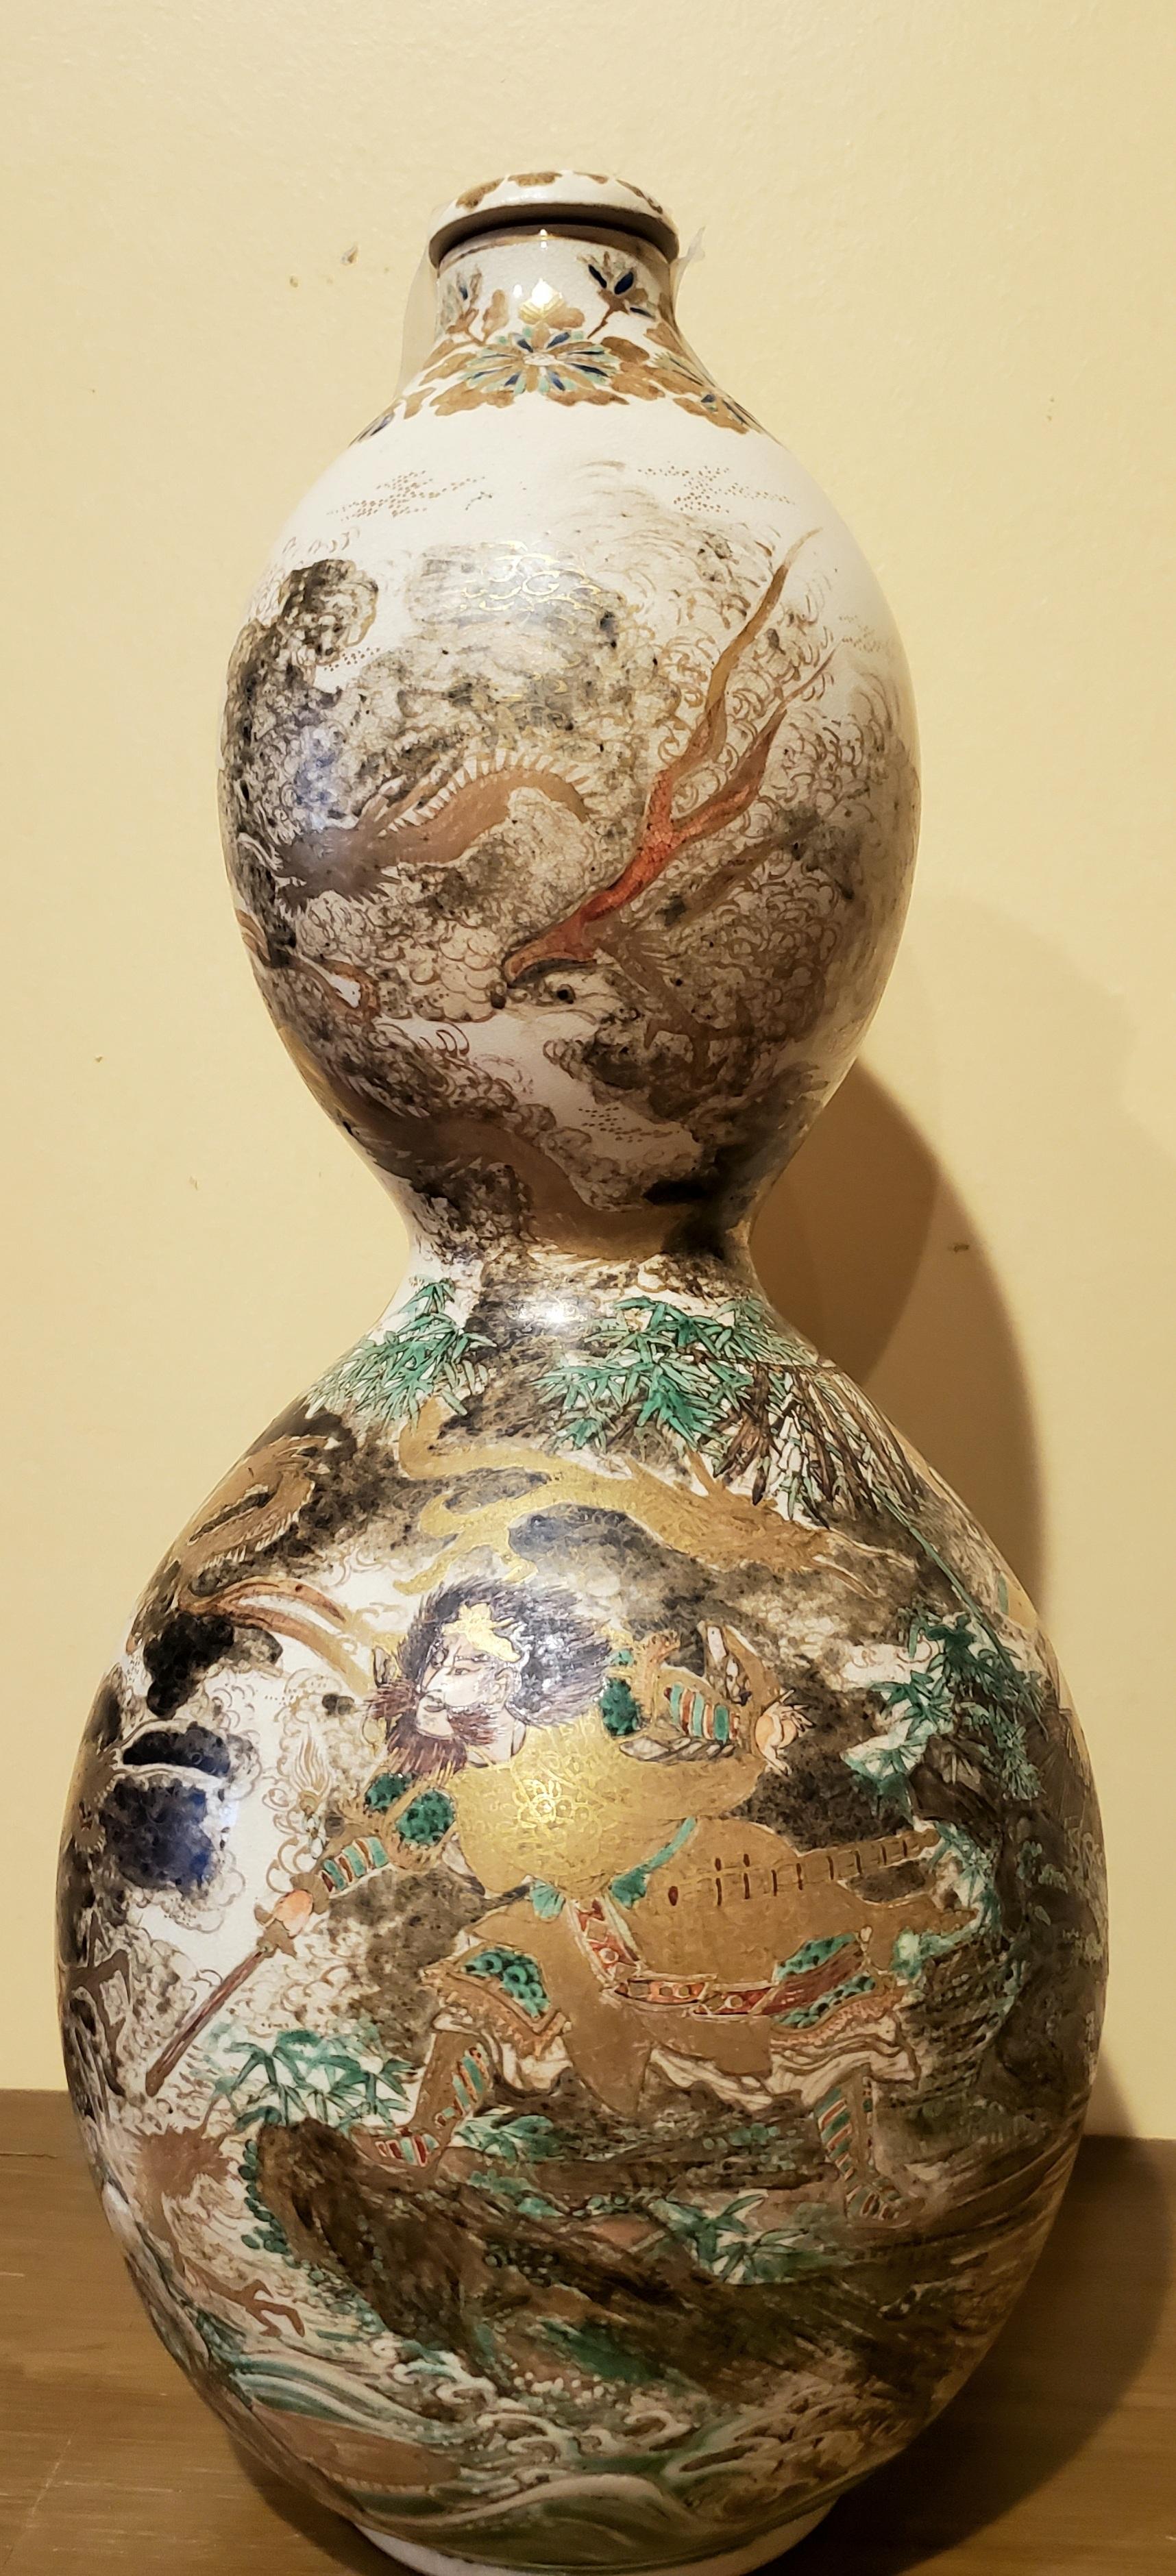 Pair of Antique Japanese Double Gourd-Shaped Satsuma Porcelain Bottle Urns In Good Condition For Sale In New Orleans, LA